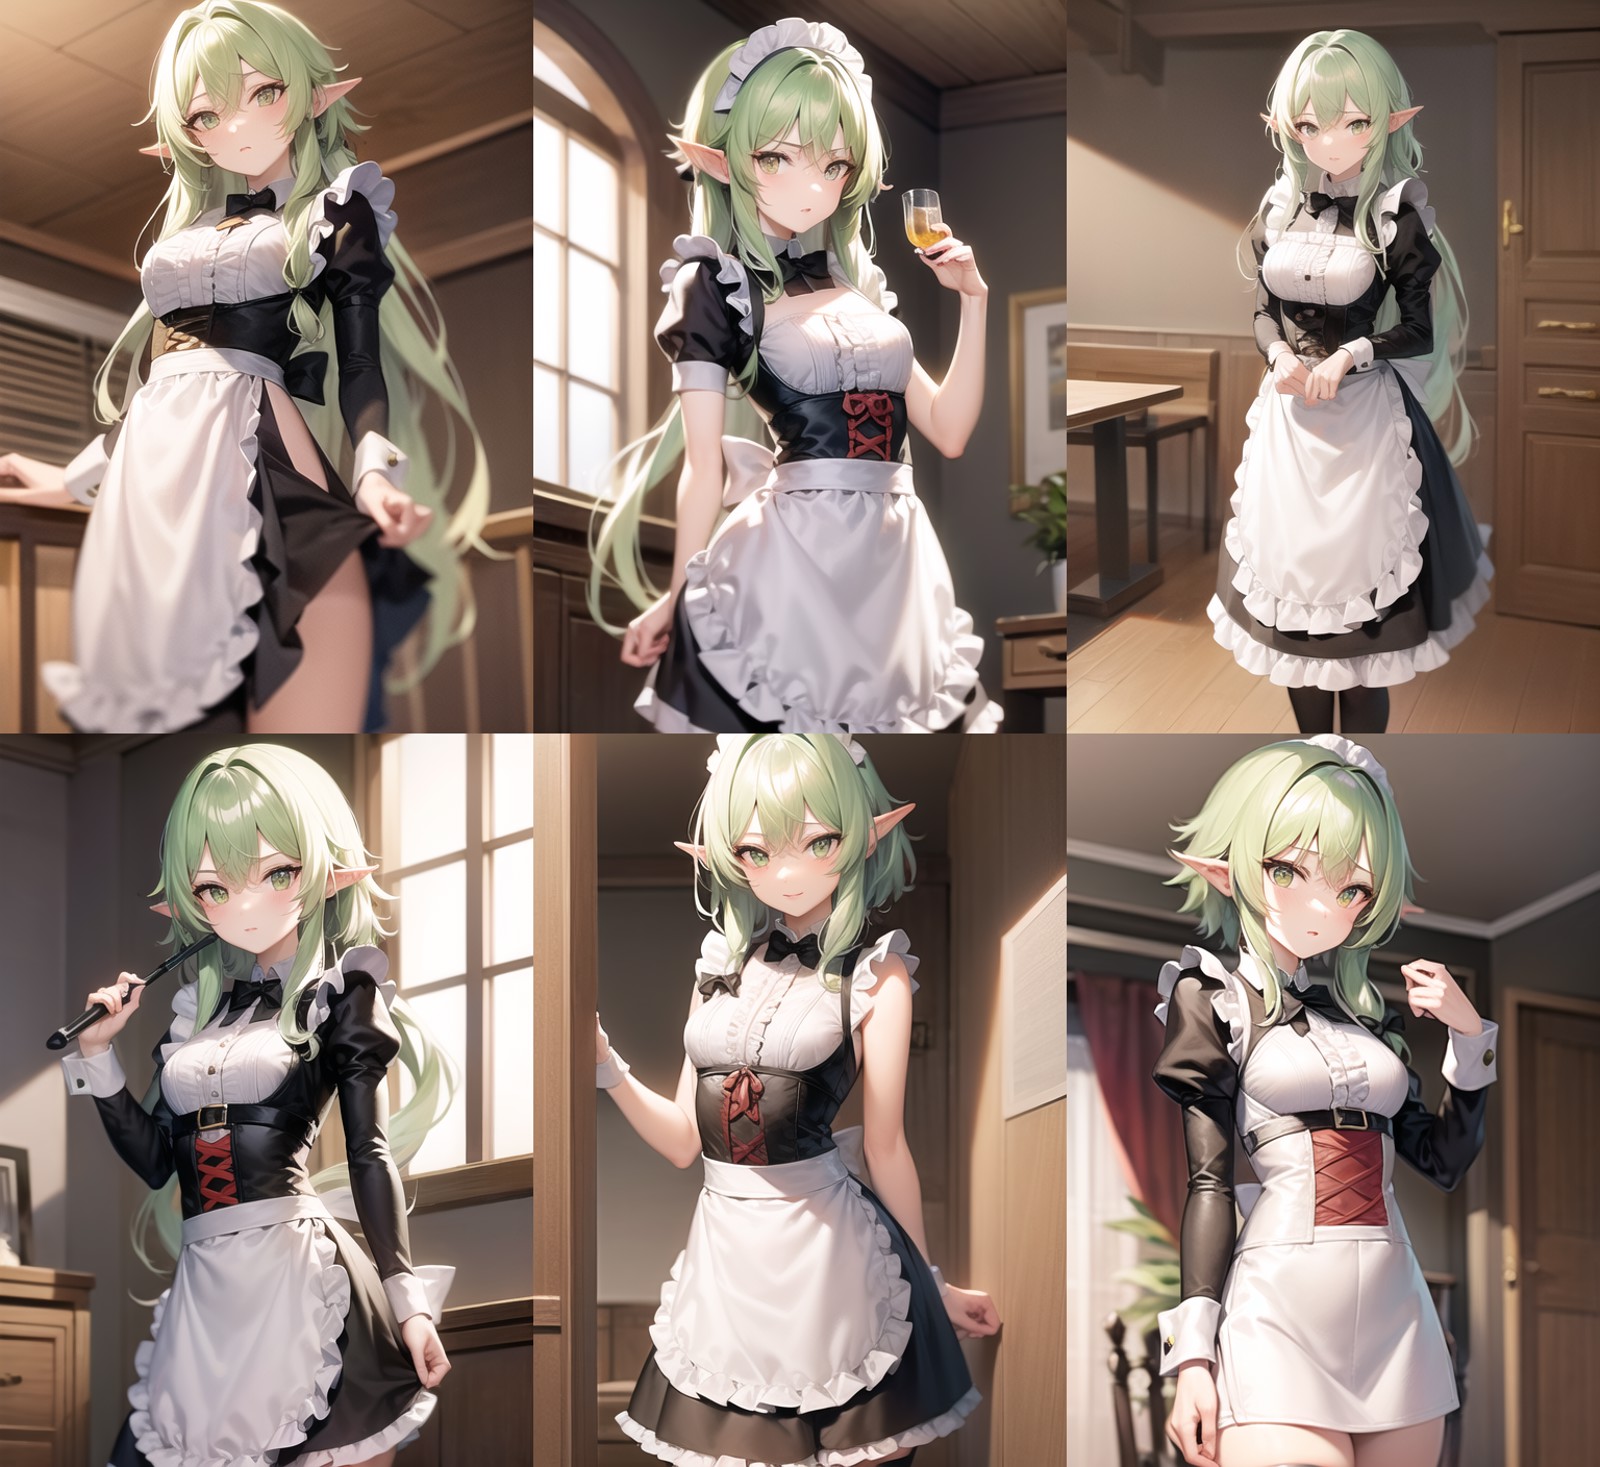 <lora:highelf1-000014:1>, rnd1, standing, indoors, simple background, maid, maid outfit, frills,